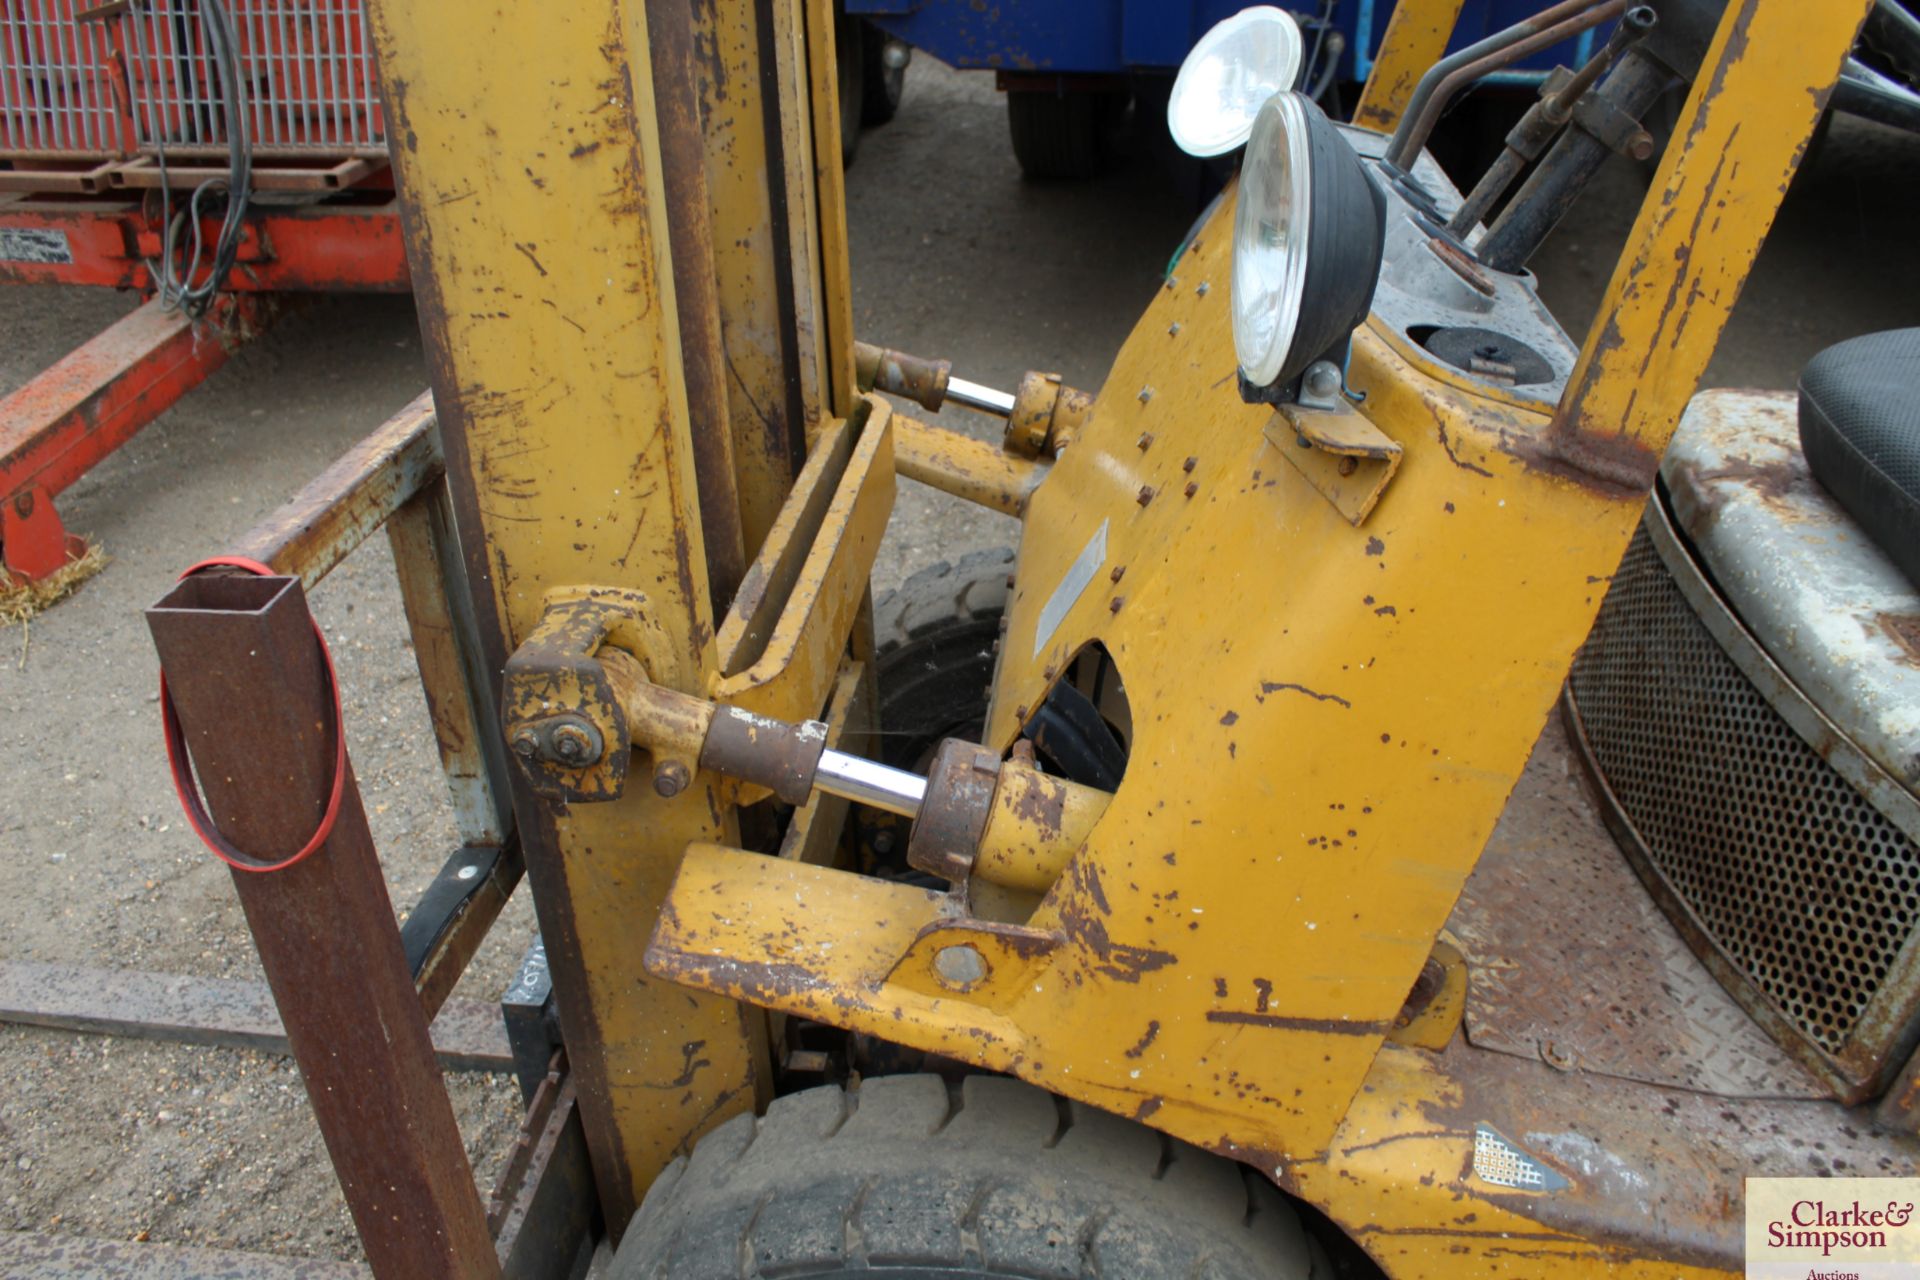 Toyota 02-2FD20 2T diesel forklift.4x366 hours. Vendor reports brakes need attention. V - Image 8 of 16